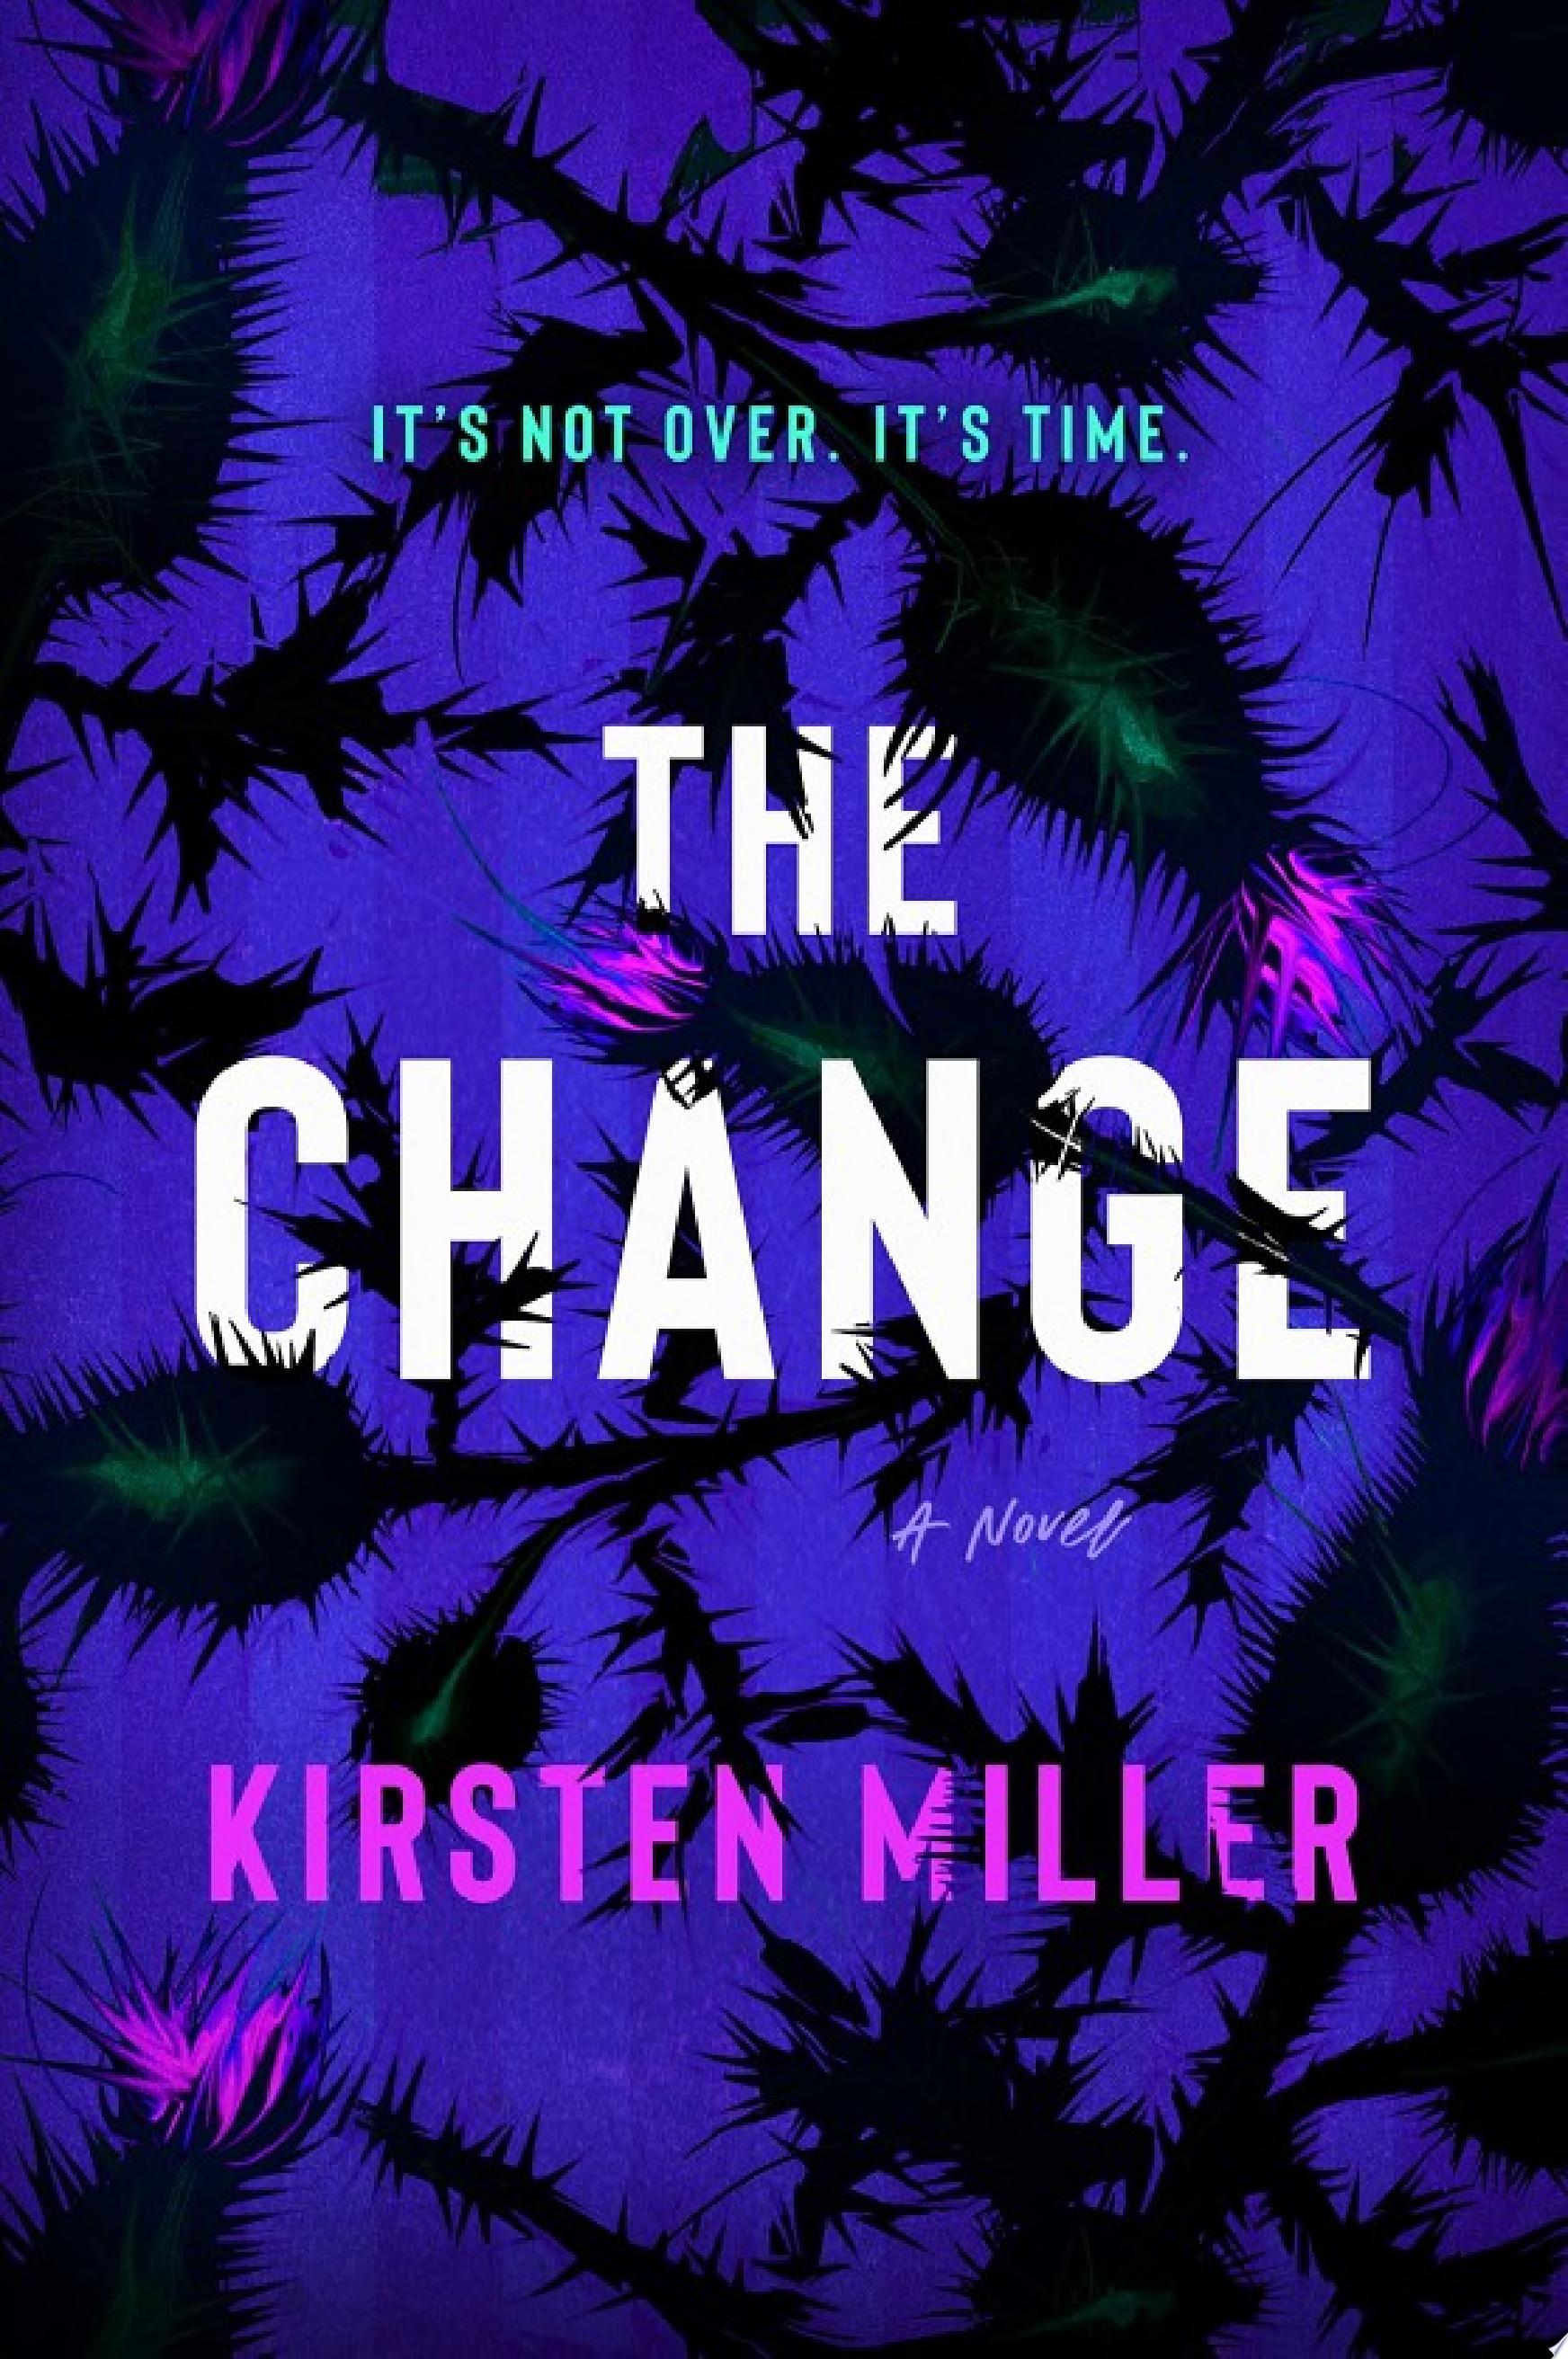 Image for "The Change"